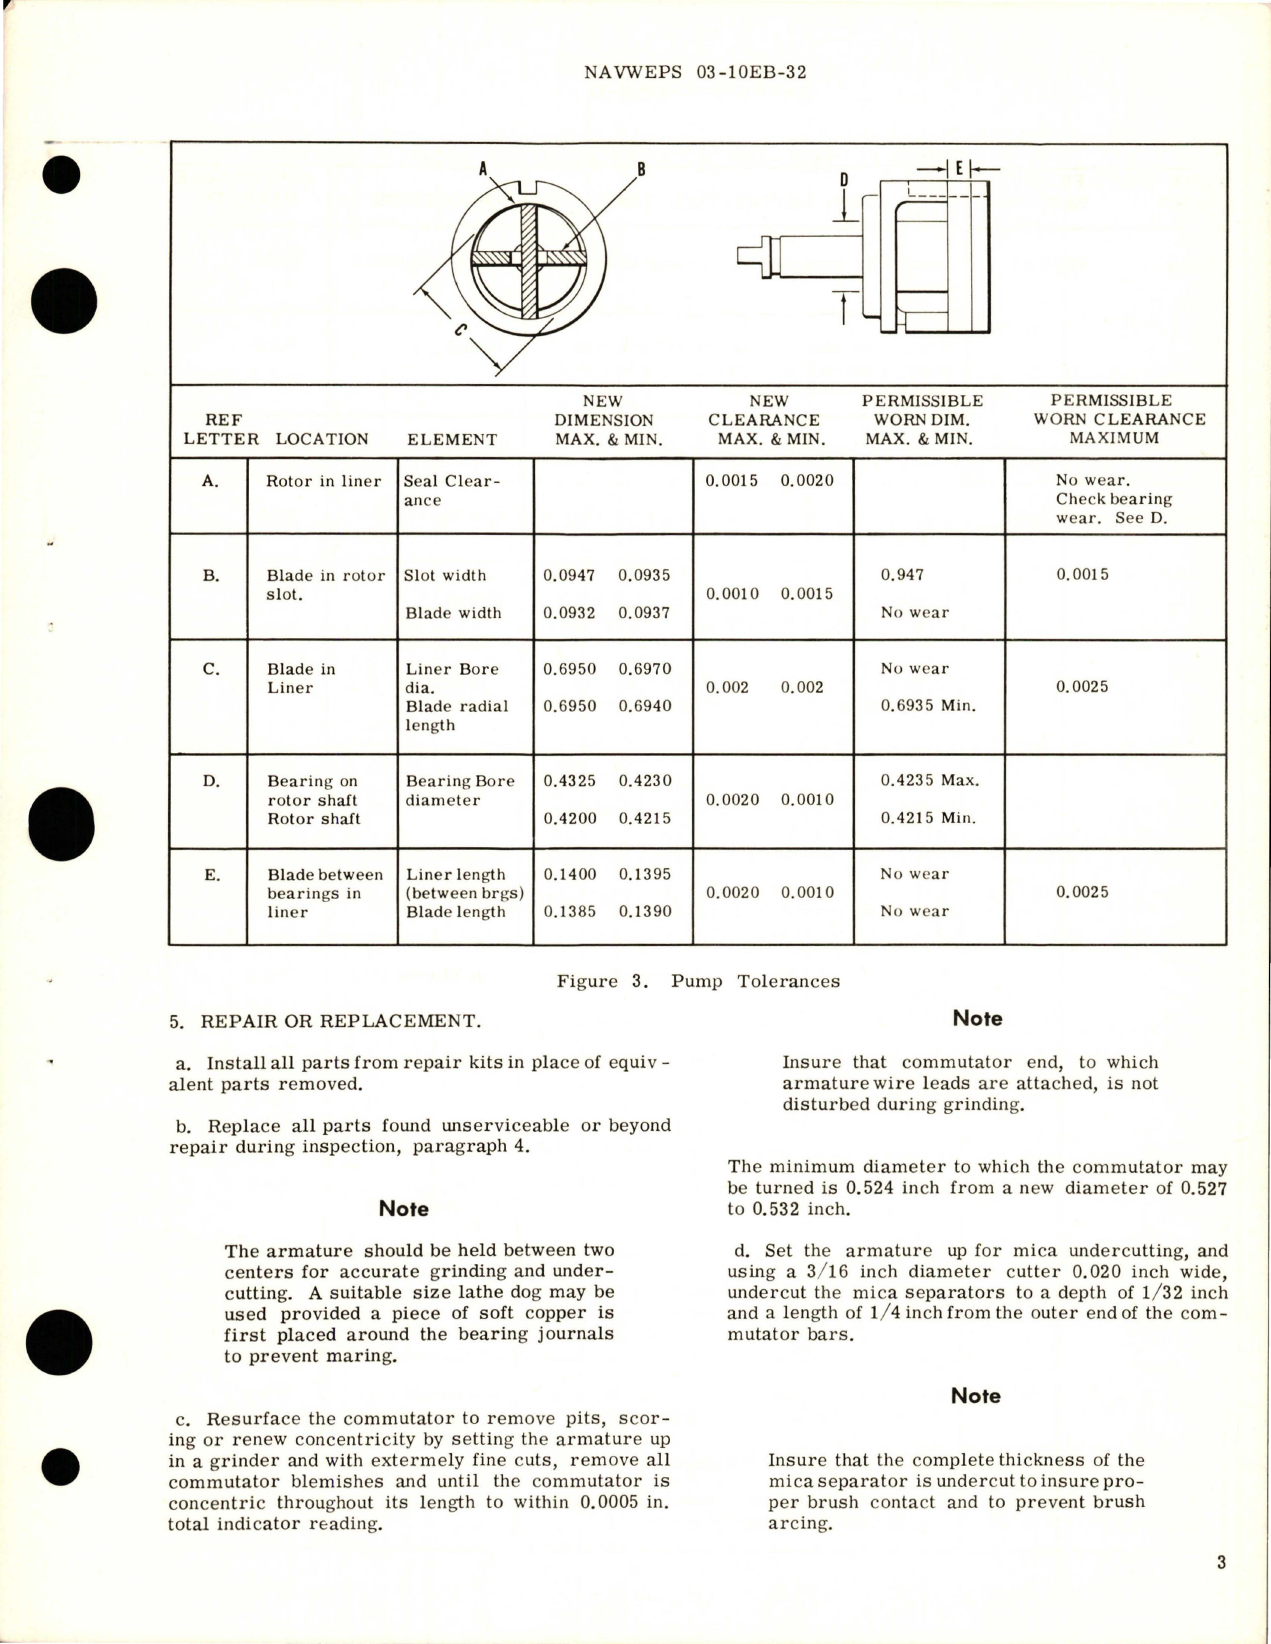 Sample page 5 from AirCorps Library document: Overhaul Instructions with Parts Breakdown for Primer Fuel Pump - Model RG16540